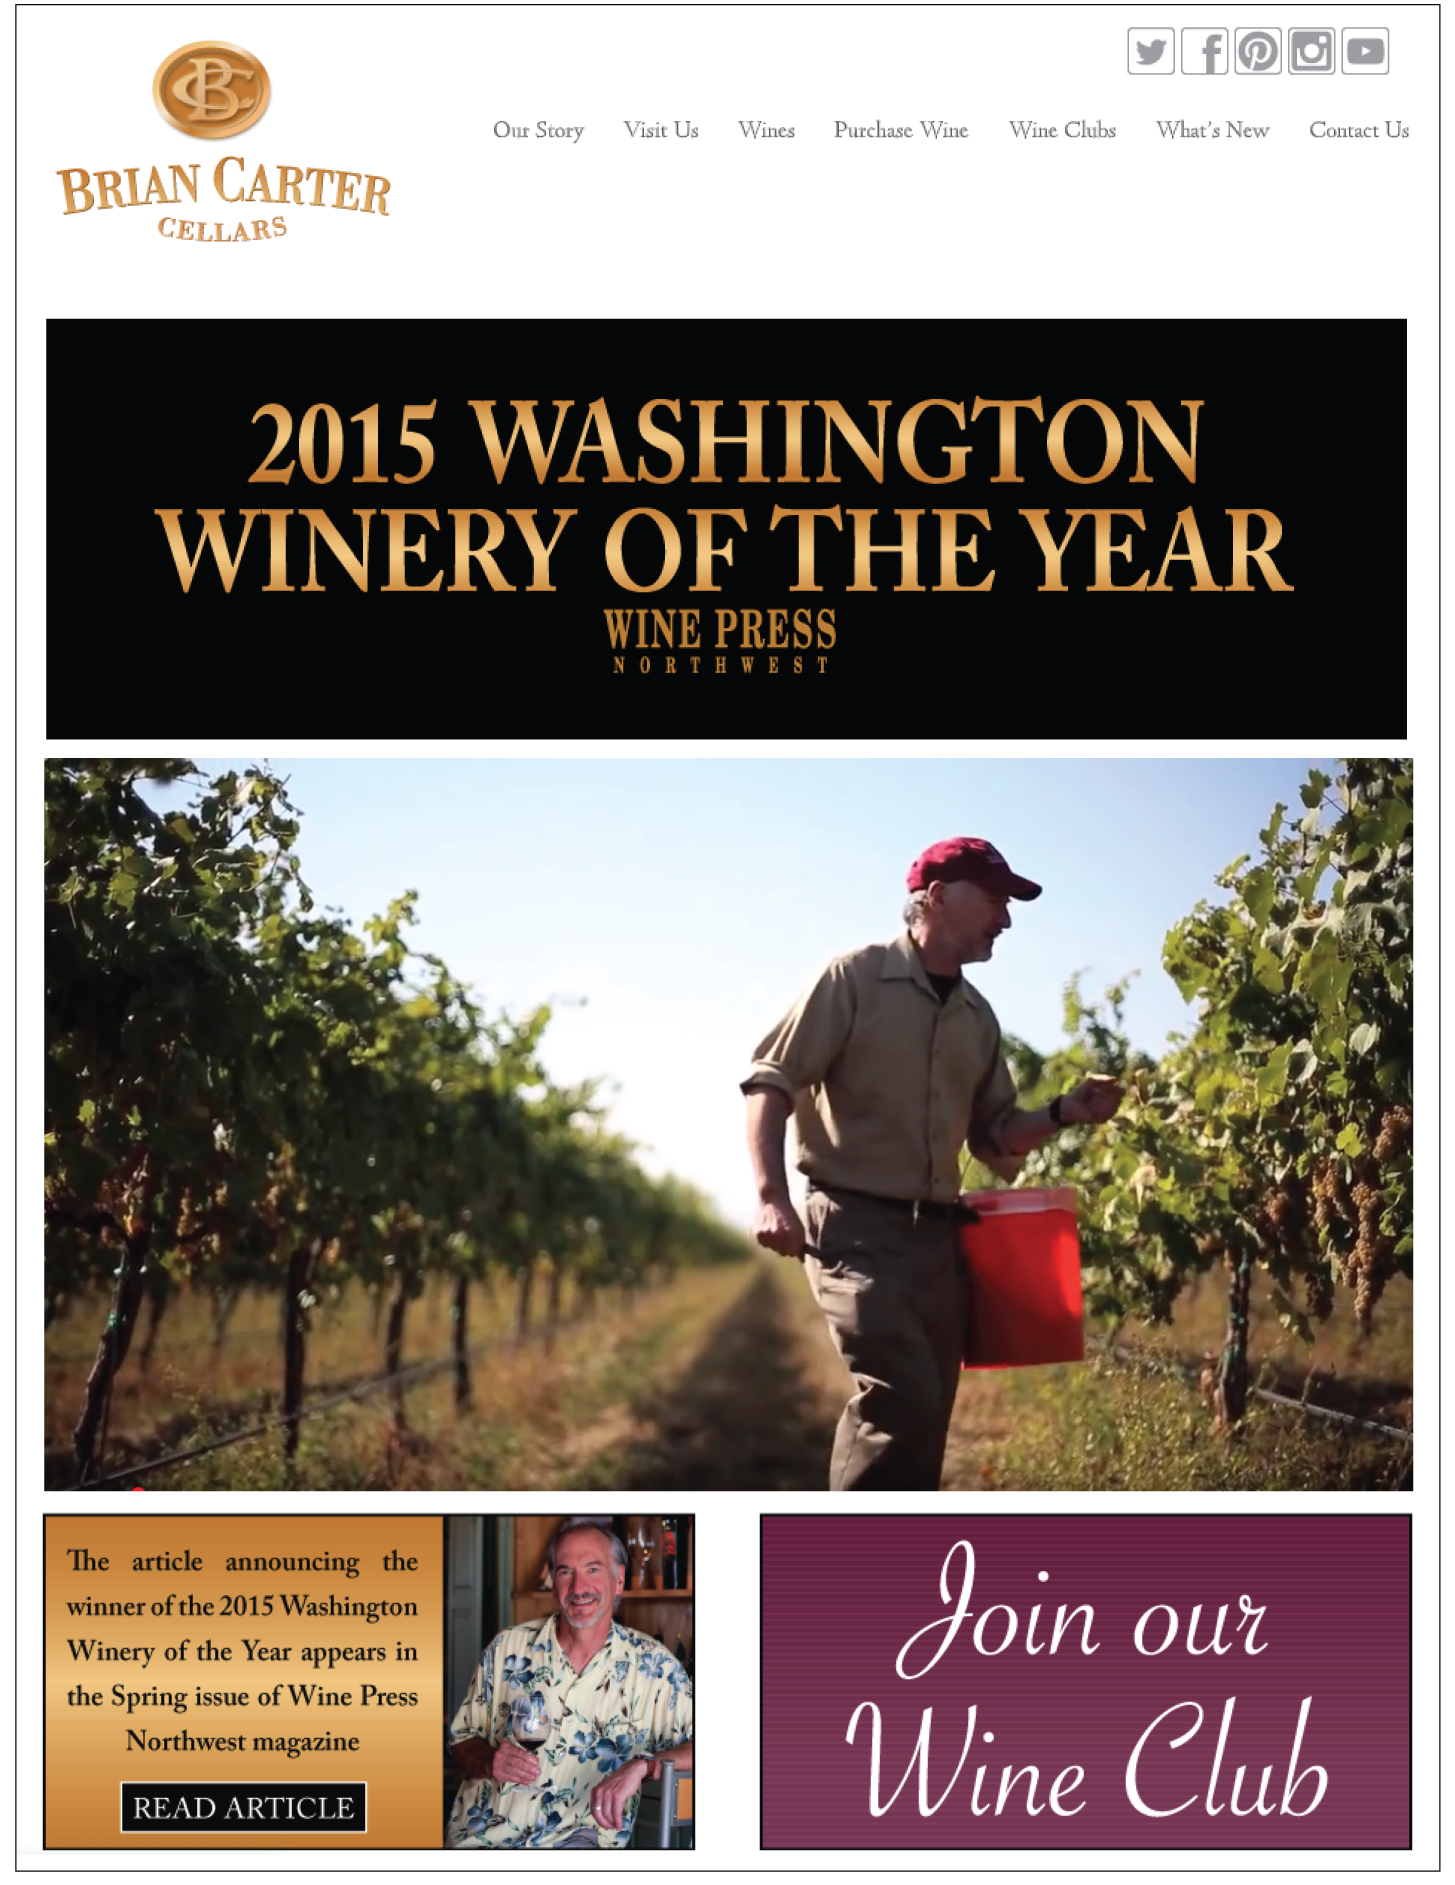 Brian Carter Cellars Website Design by Ontra Marketing Group Woodinville